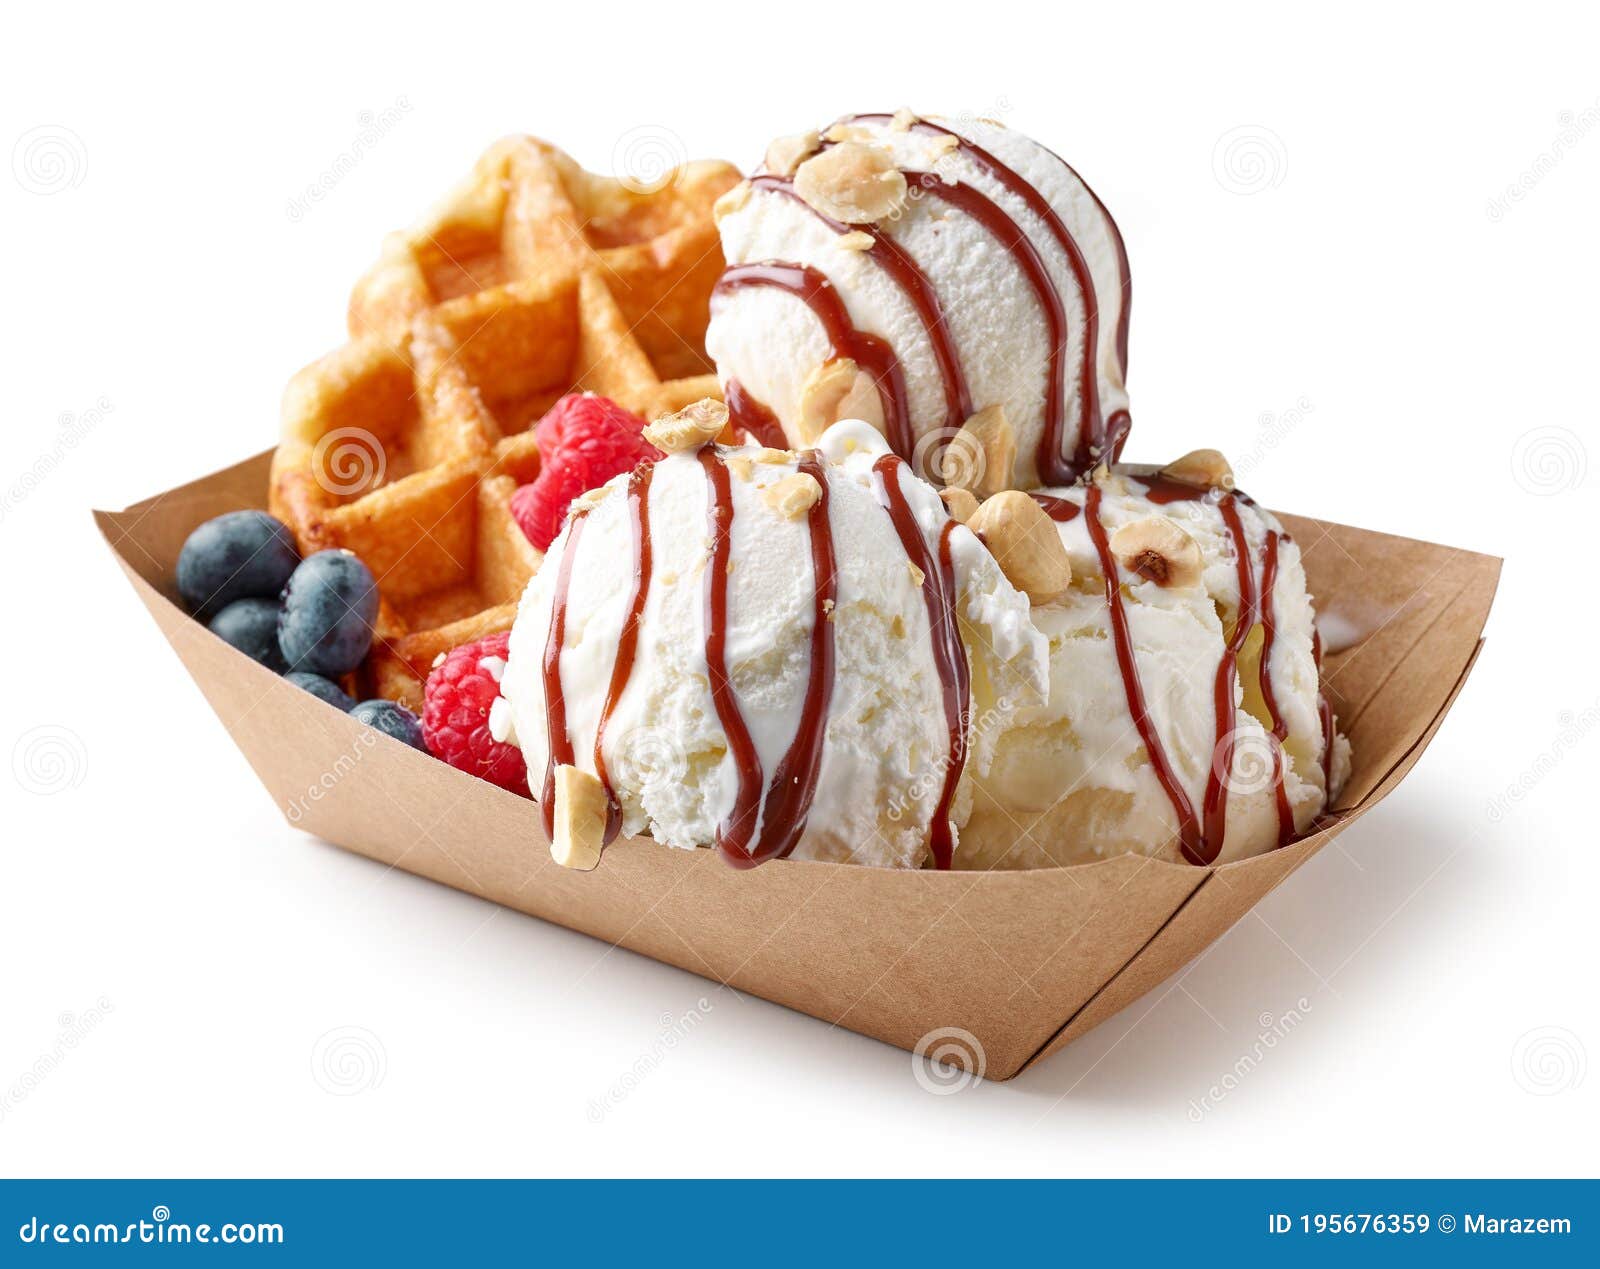 Belgian Waffle With Fresh Berries And Vanilla Ice Cream Stock Image - Image Of Gourmet, Brussels: 195676359